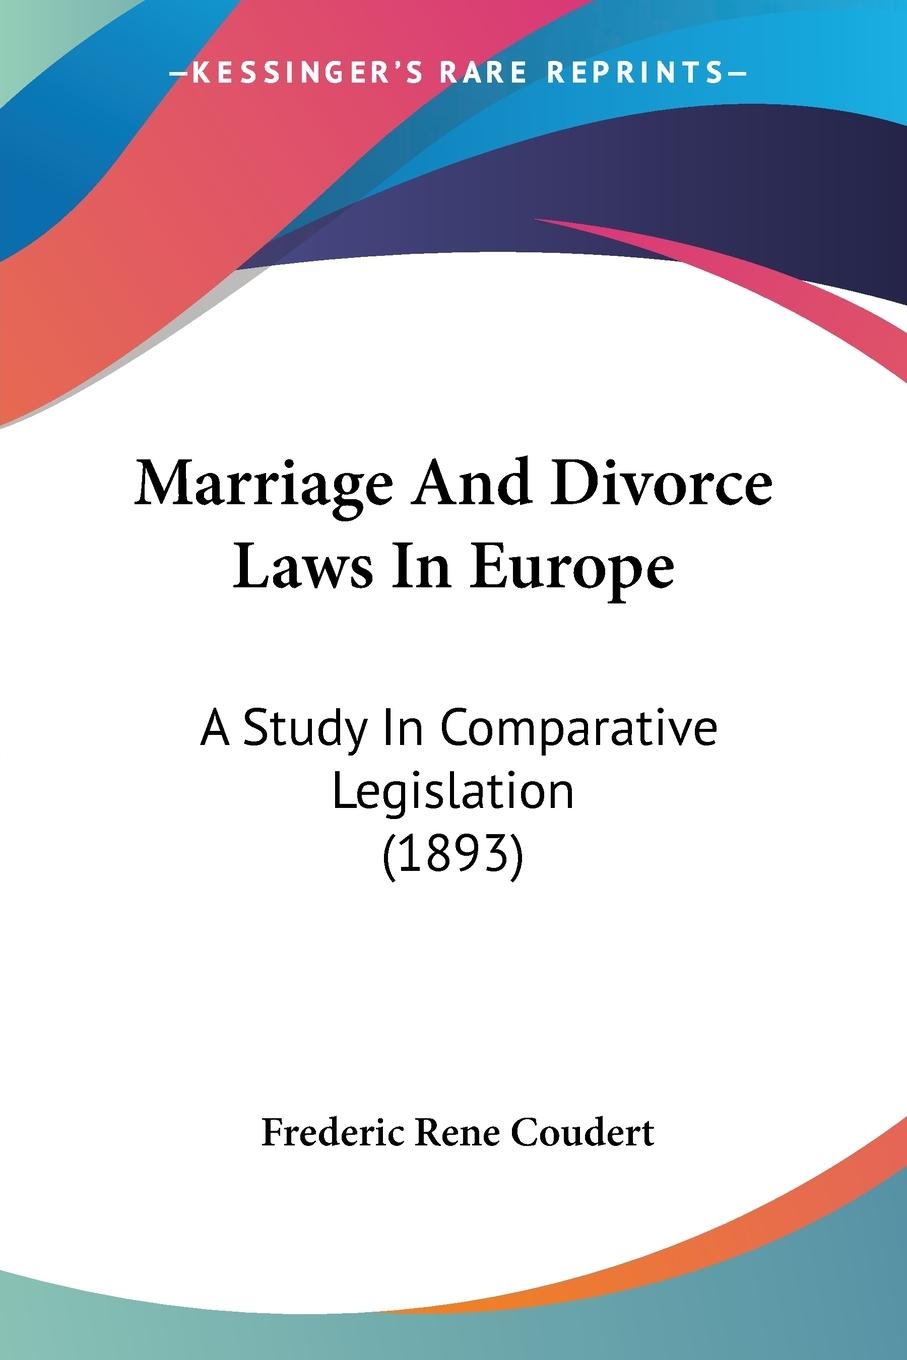 Marriage And Divorce Laws In Europe - Coudert, Frederic Rene